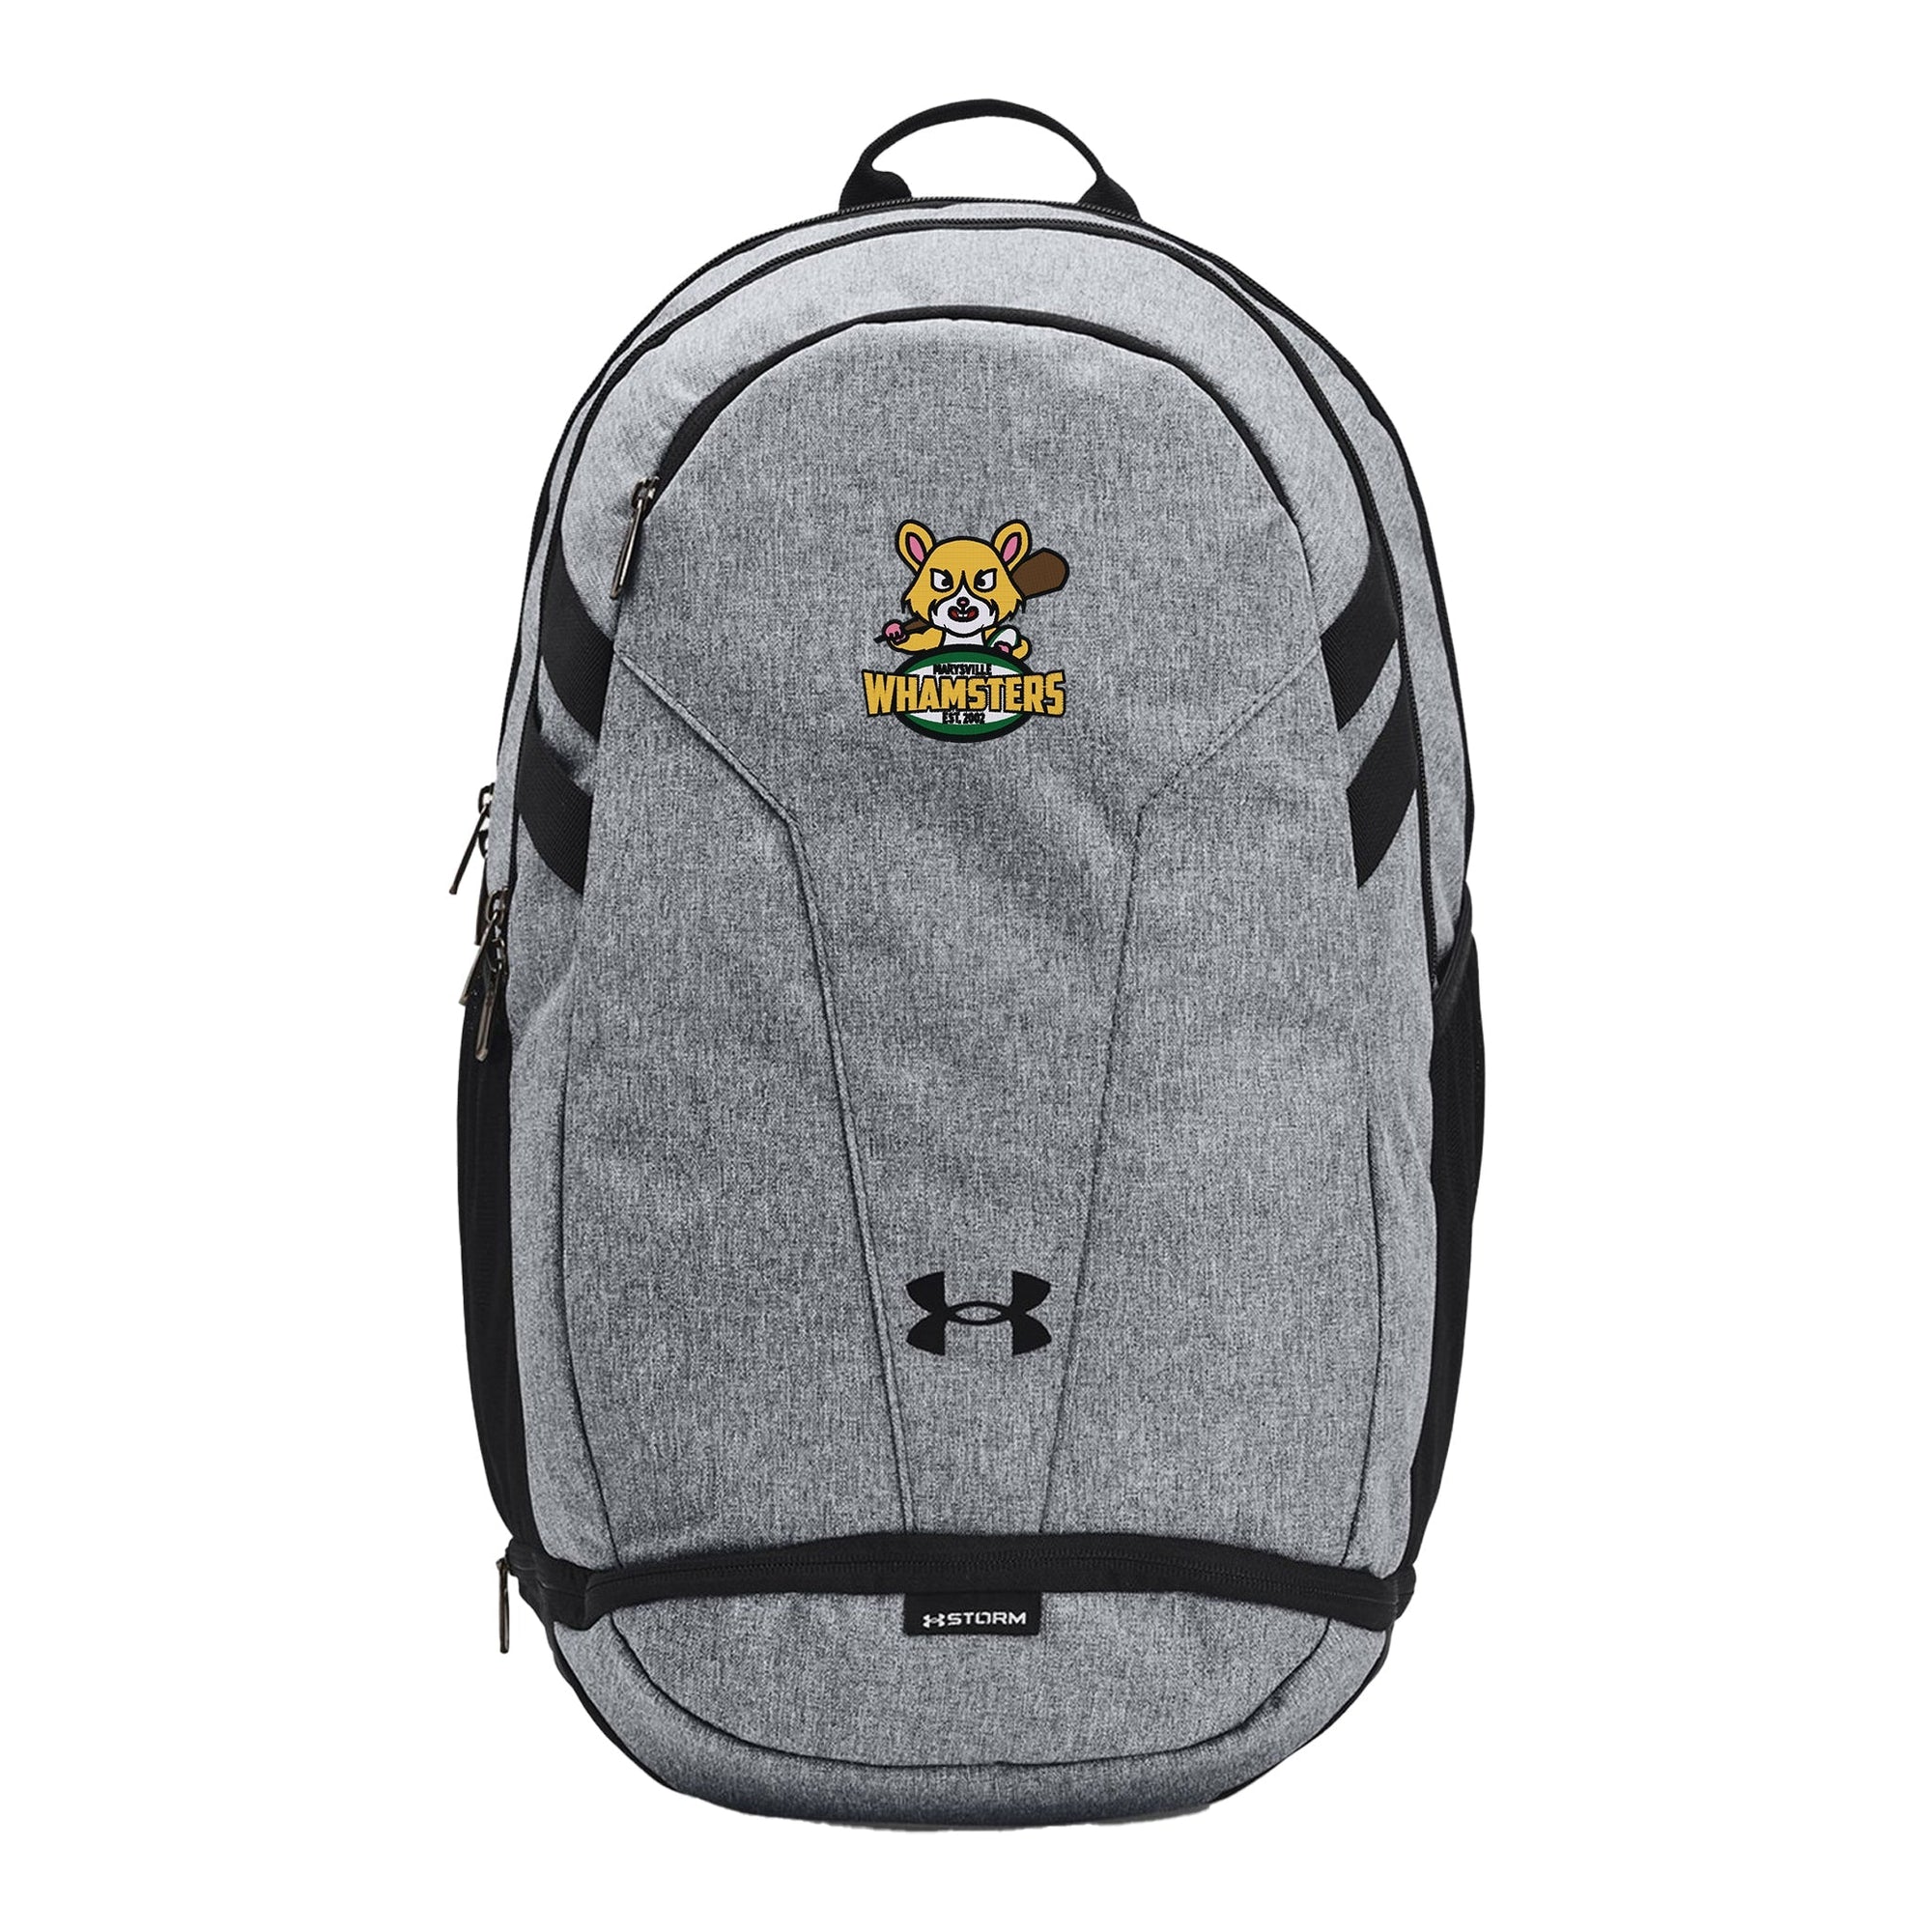 Rugby Imports Whamsters Hustle 5.0 Backpack